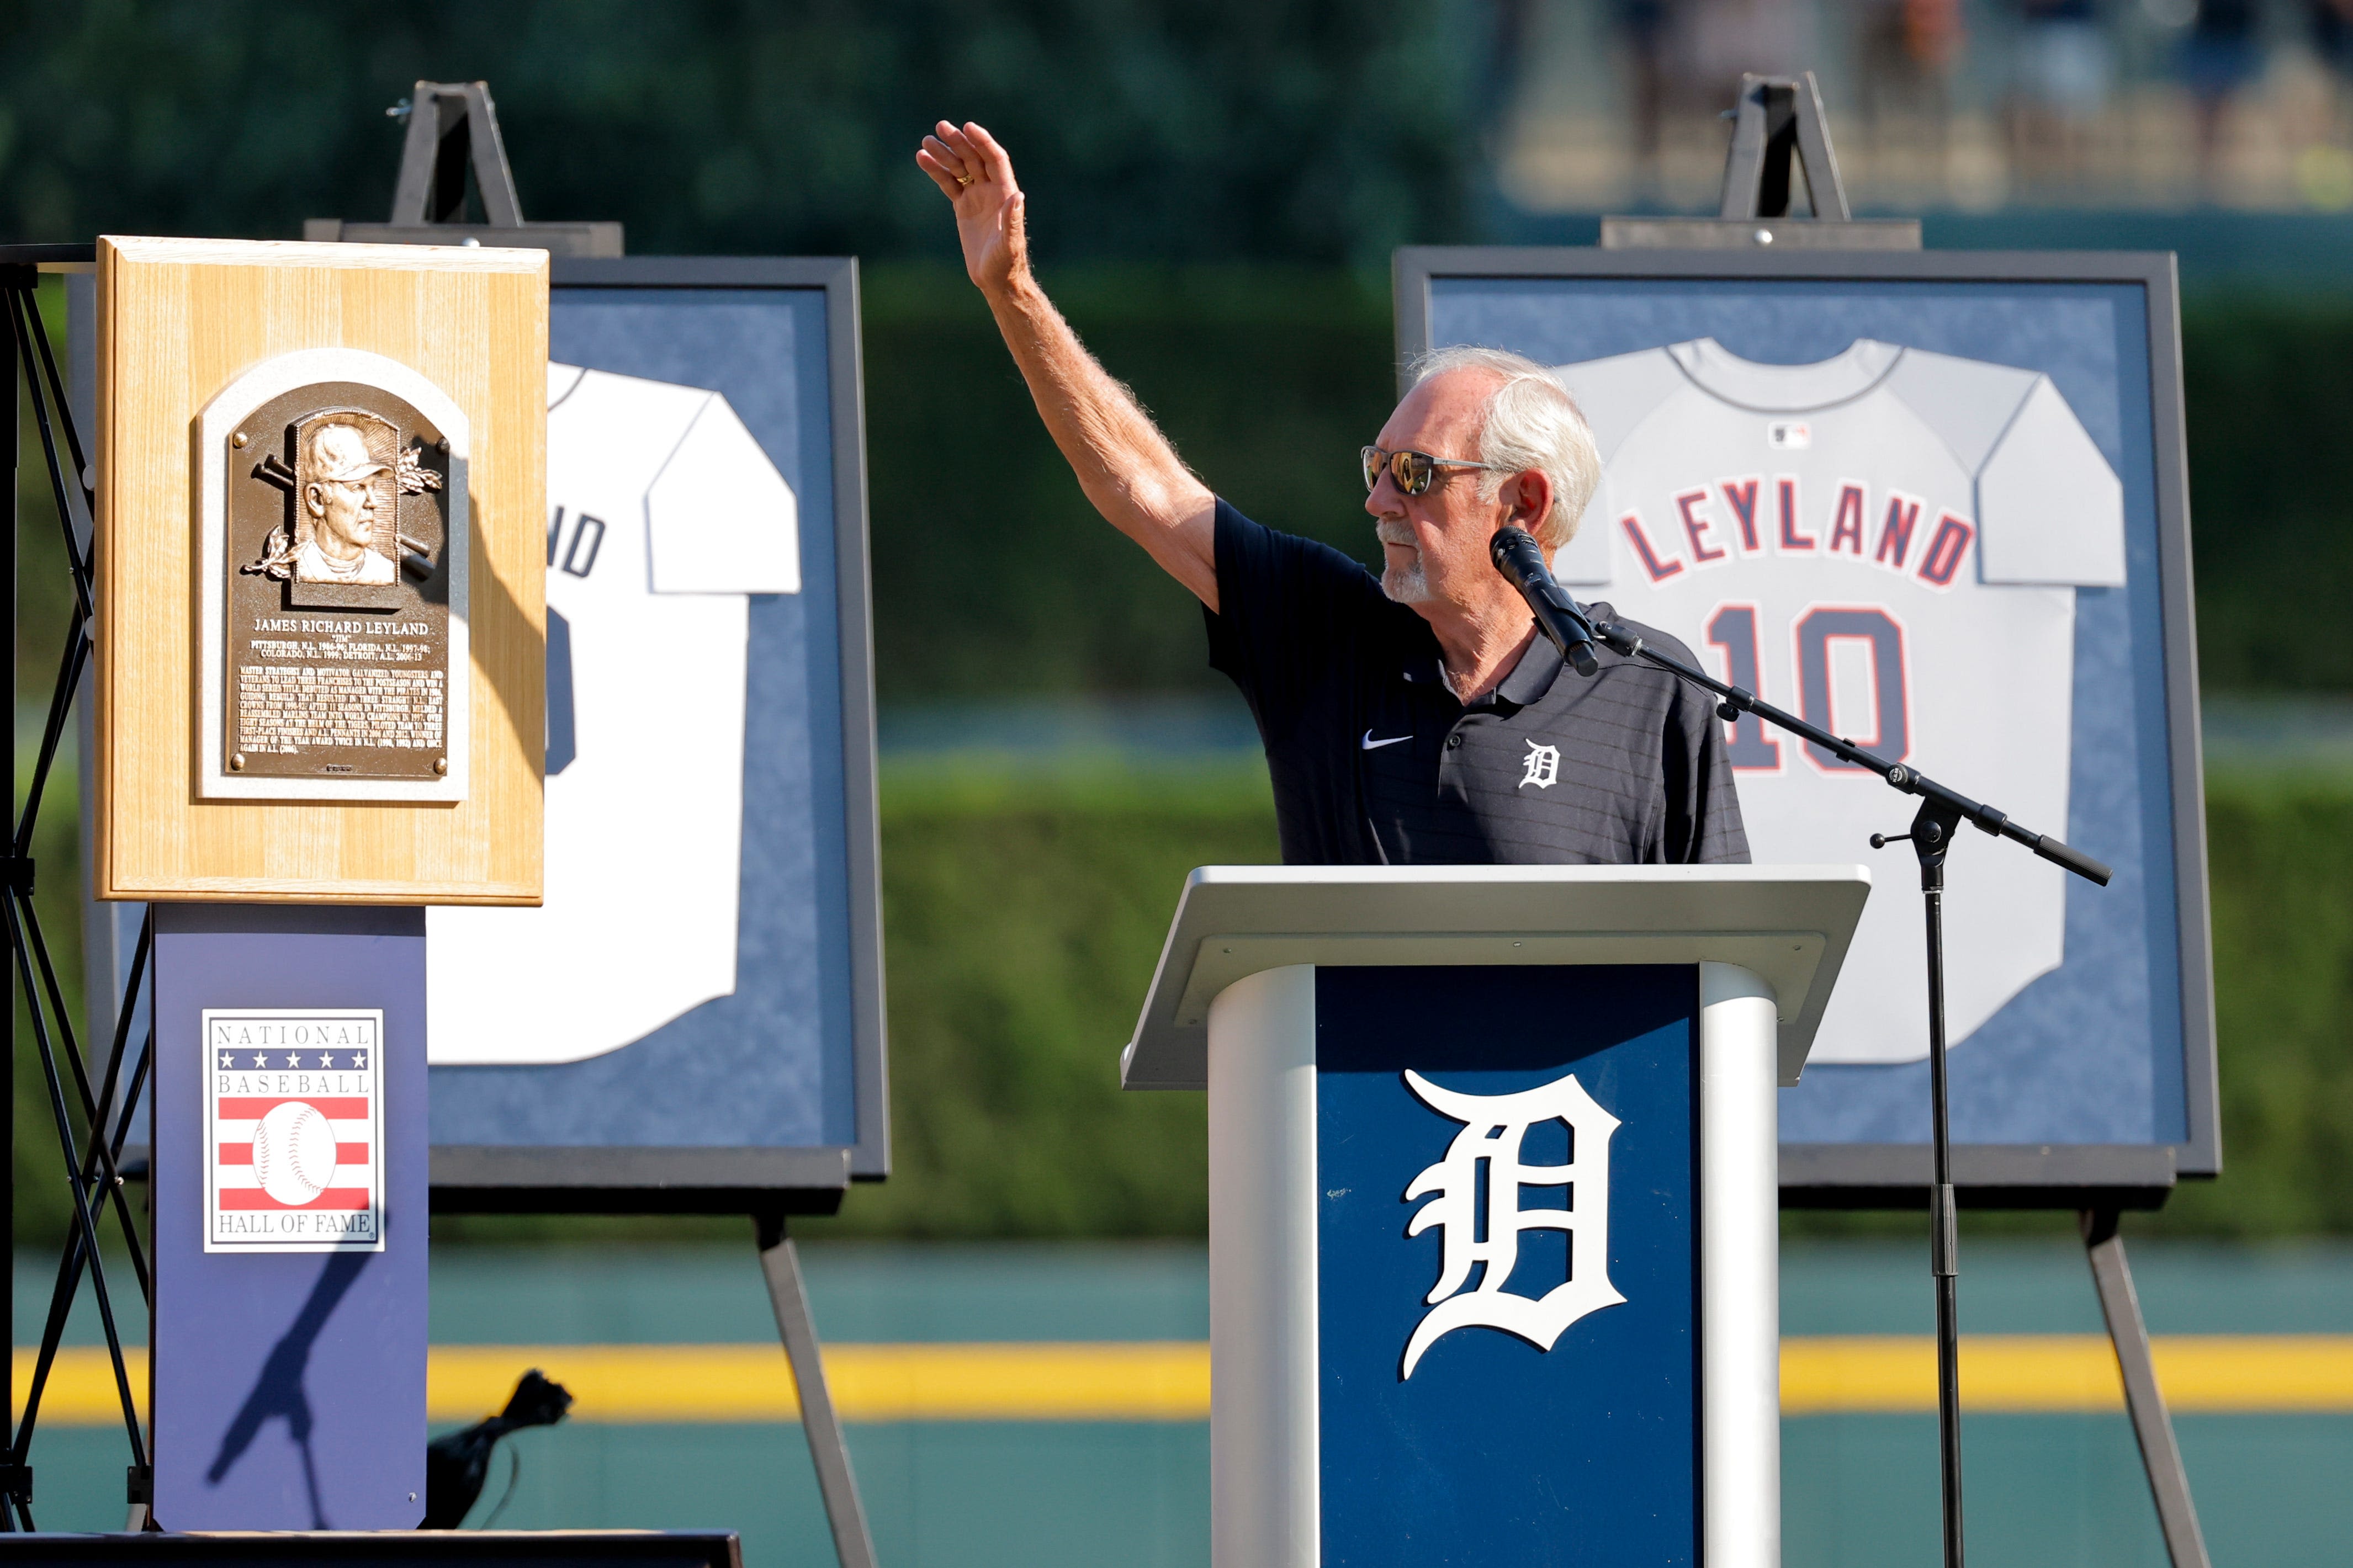 Hall of Fame manager Jim Leyland sends message to Tigers fans during jersey retirement